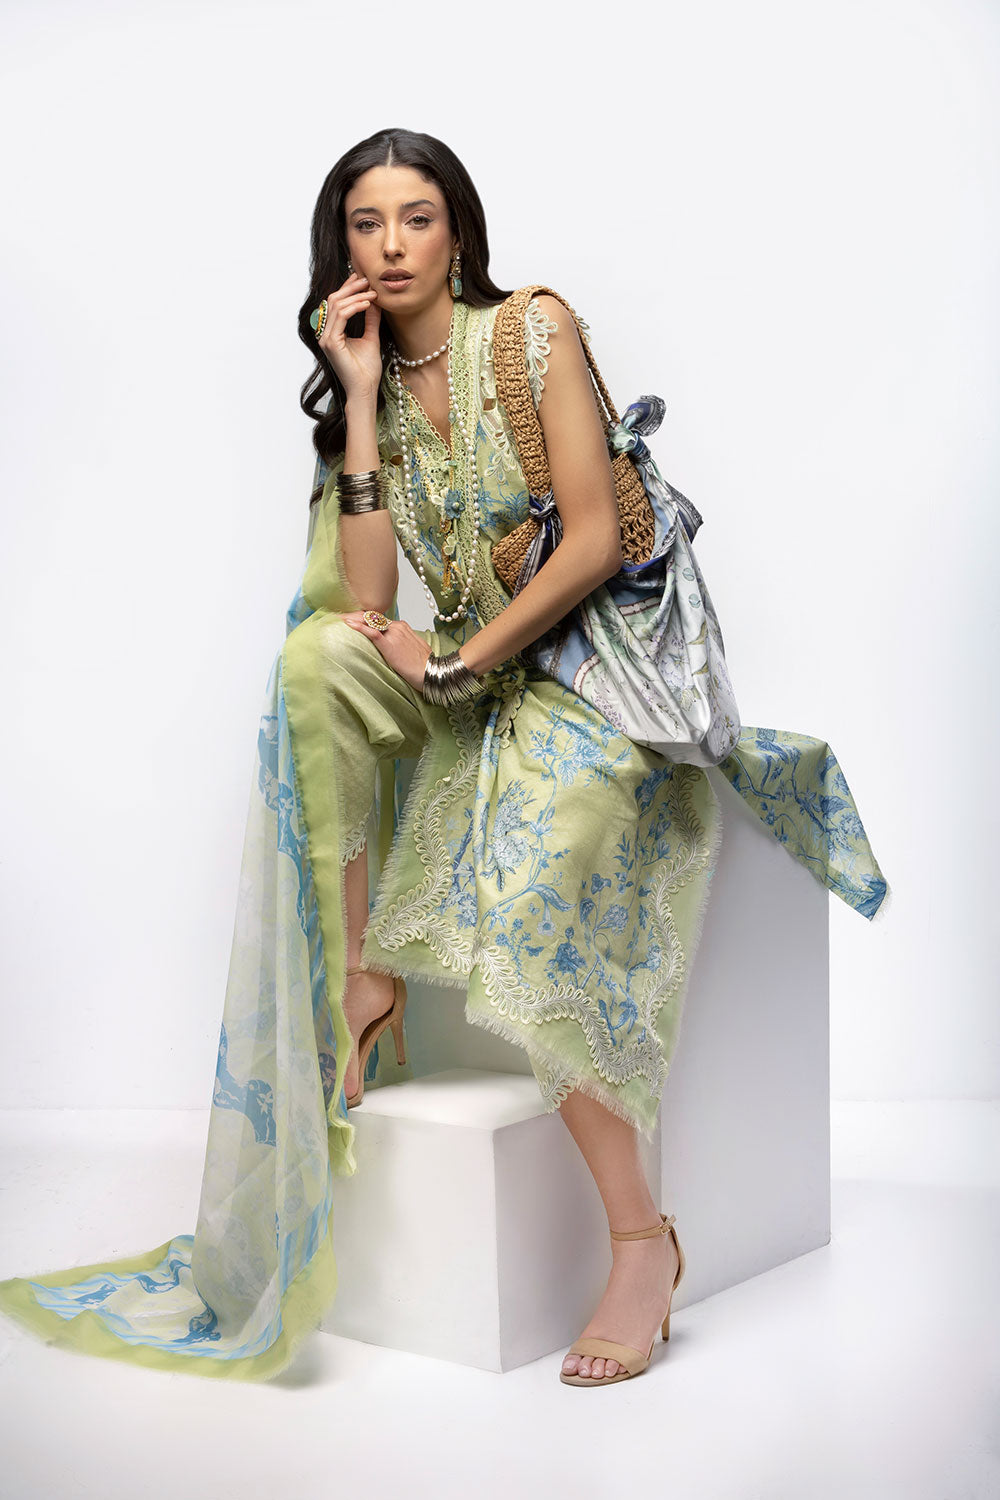 Buy Now, D#5A - Sobia Nazir Vital 2023 - Vol. 2 - Shahana Collection UK  - Wedding and Bridal Party Dresses - Sobia Nazir in UK - Summer Lawn 2023